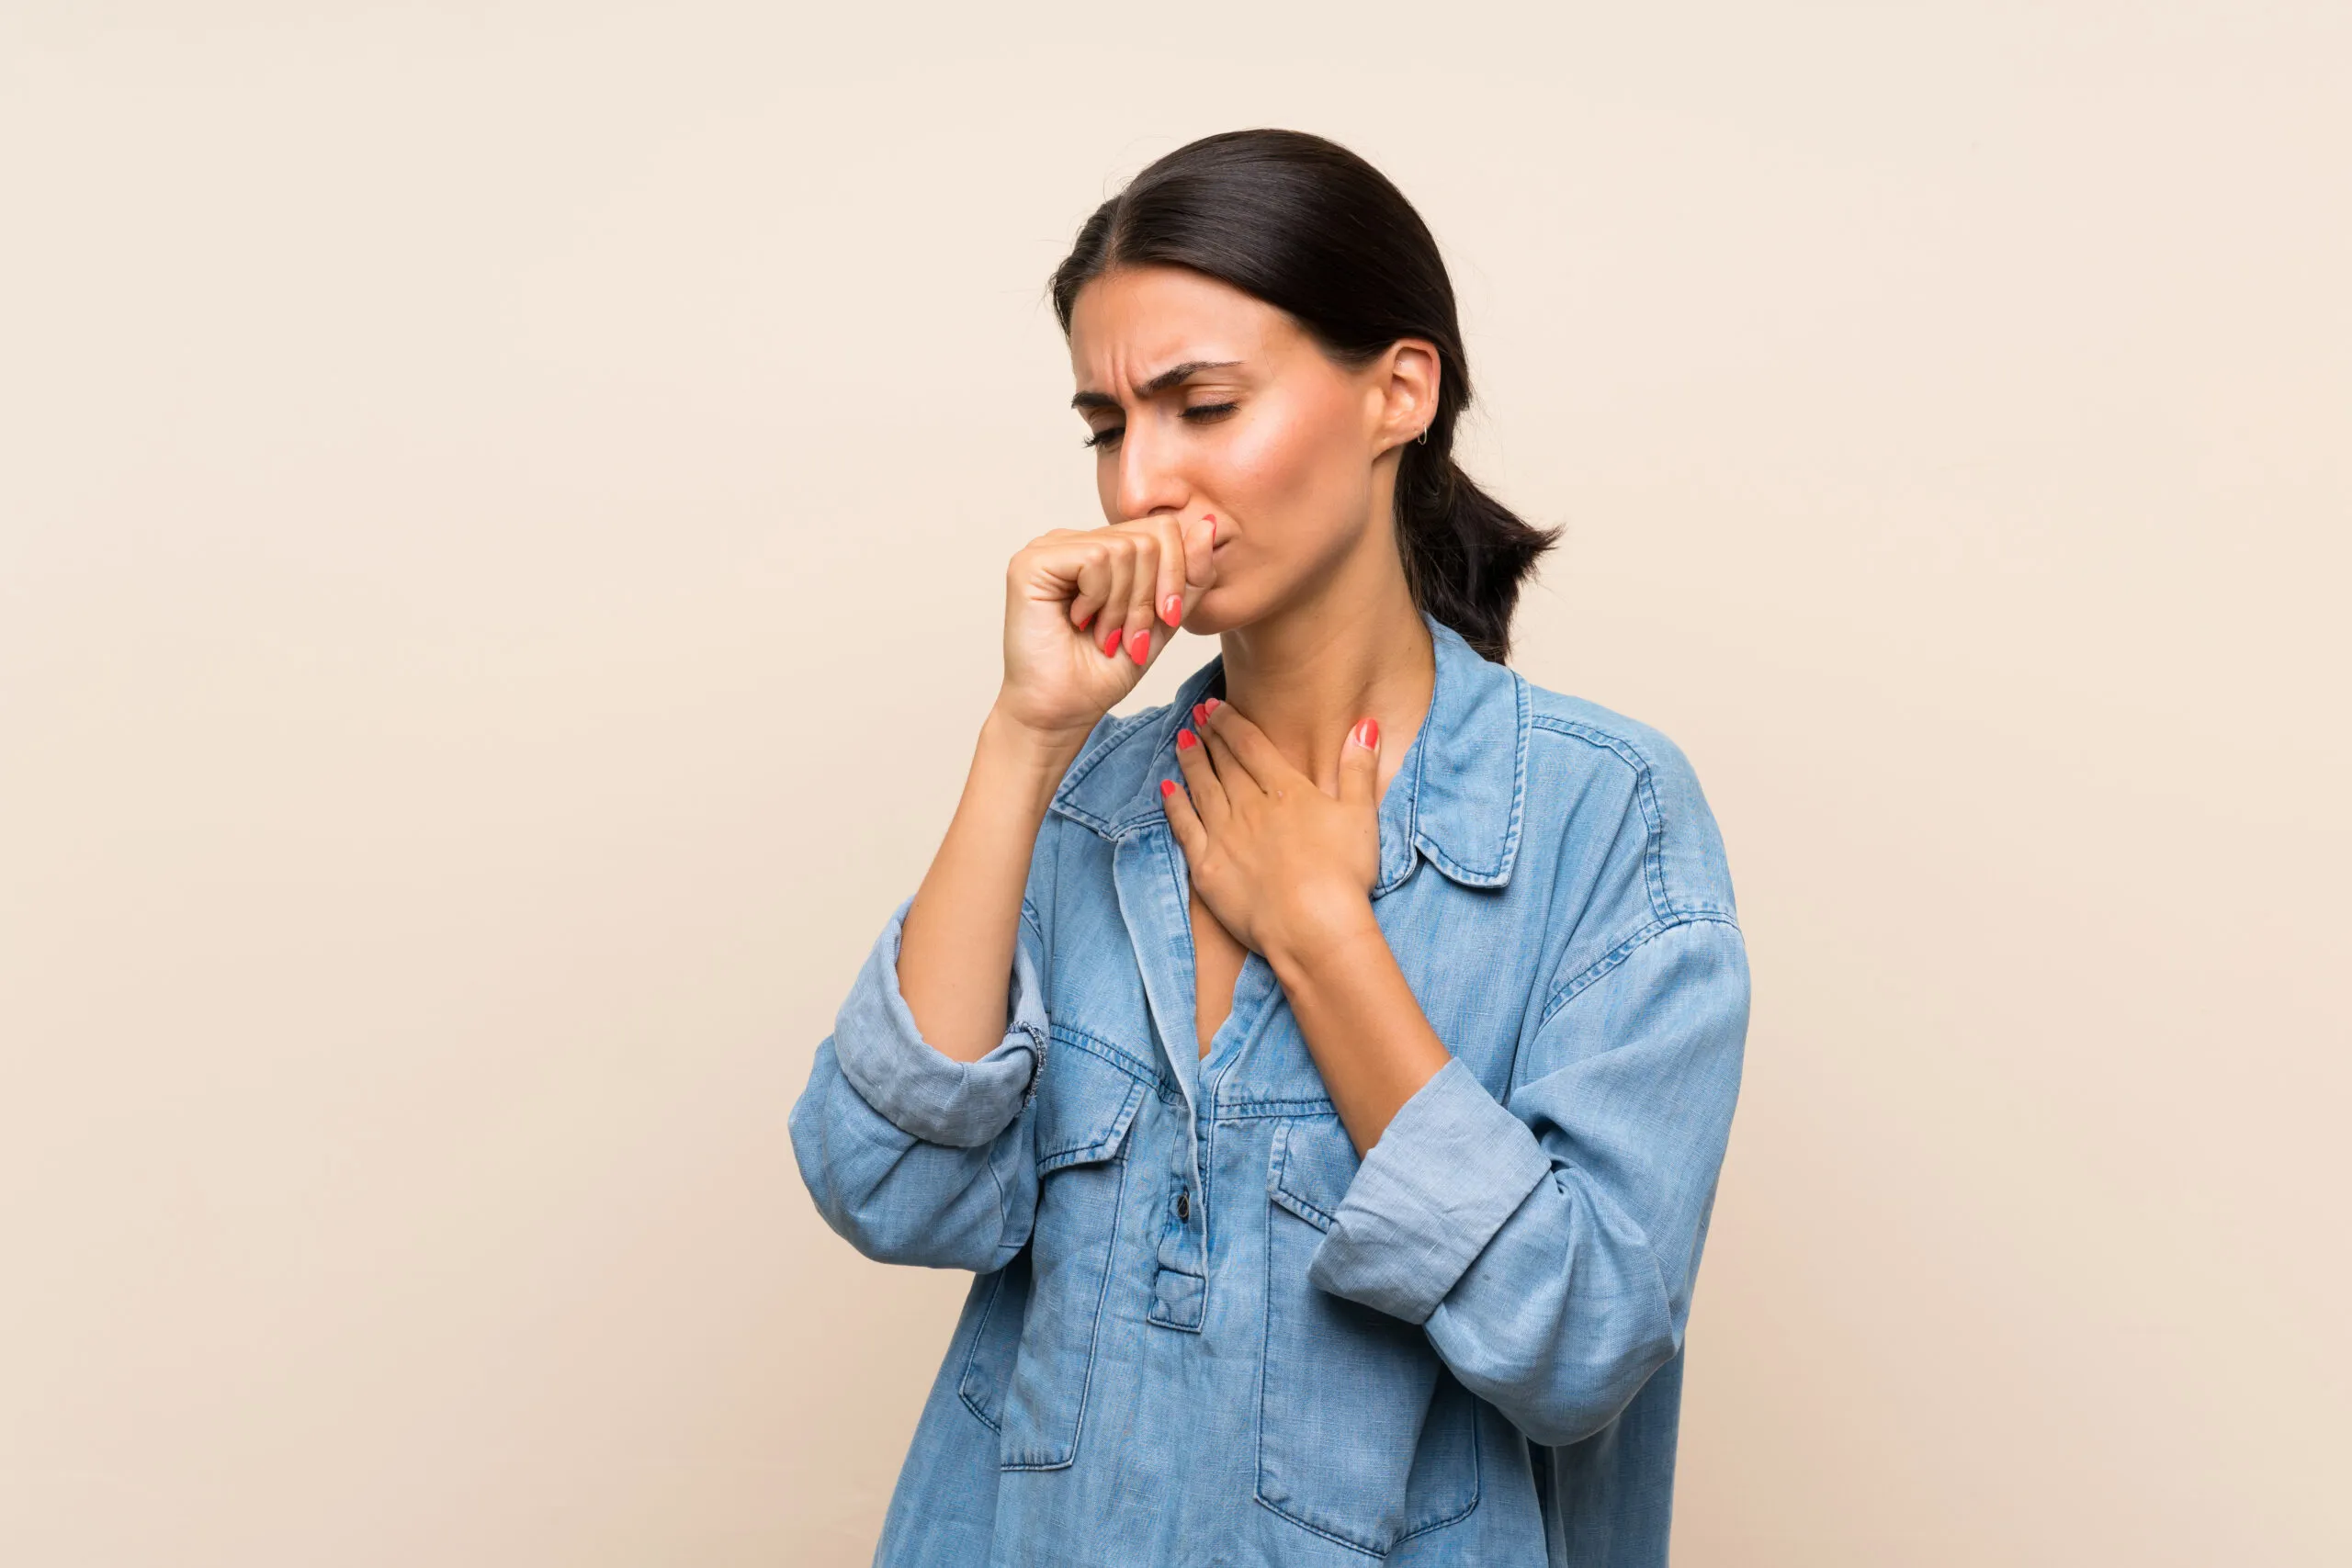 Types of Coughs and How to Know When It’s Serious